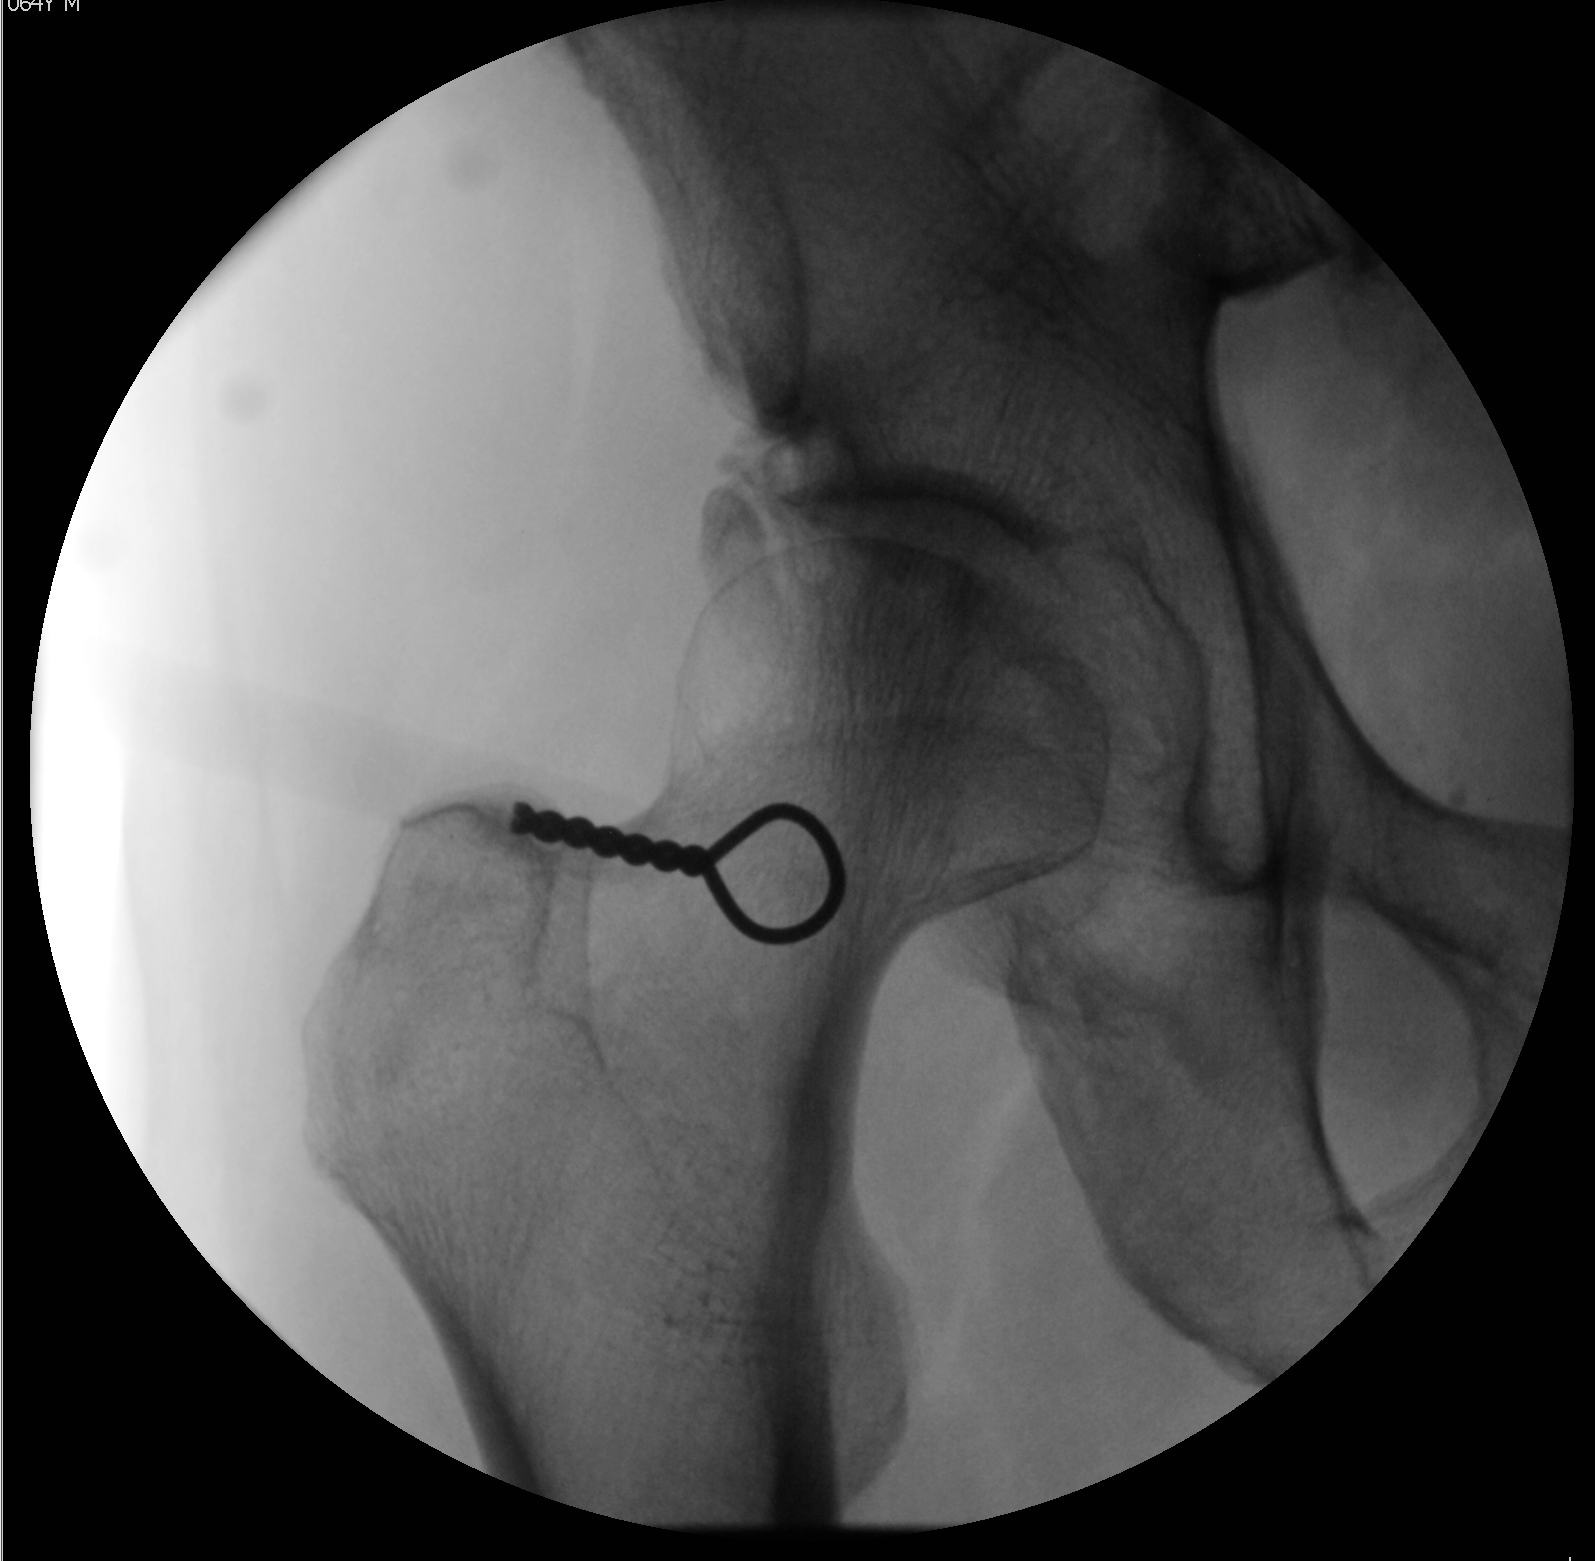 Initial fluoroscopic visualization of the hip joint. The metallic marker denotes the femoral head-neck junction as the target site for injection